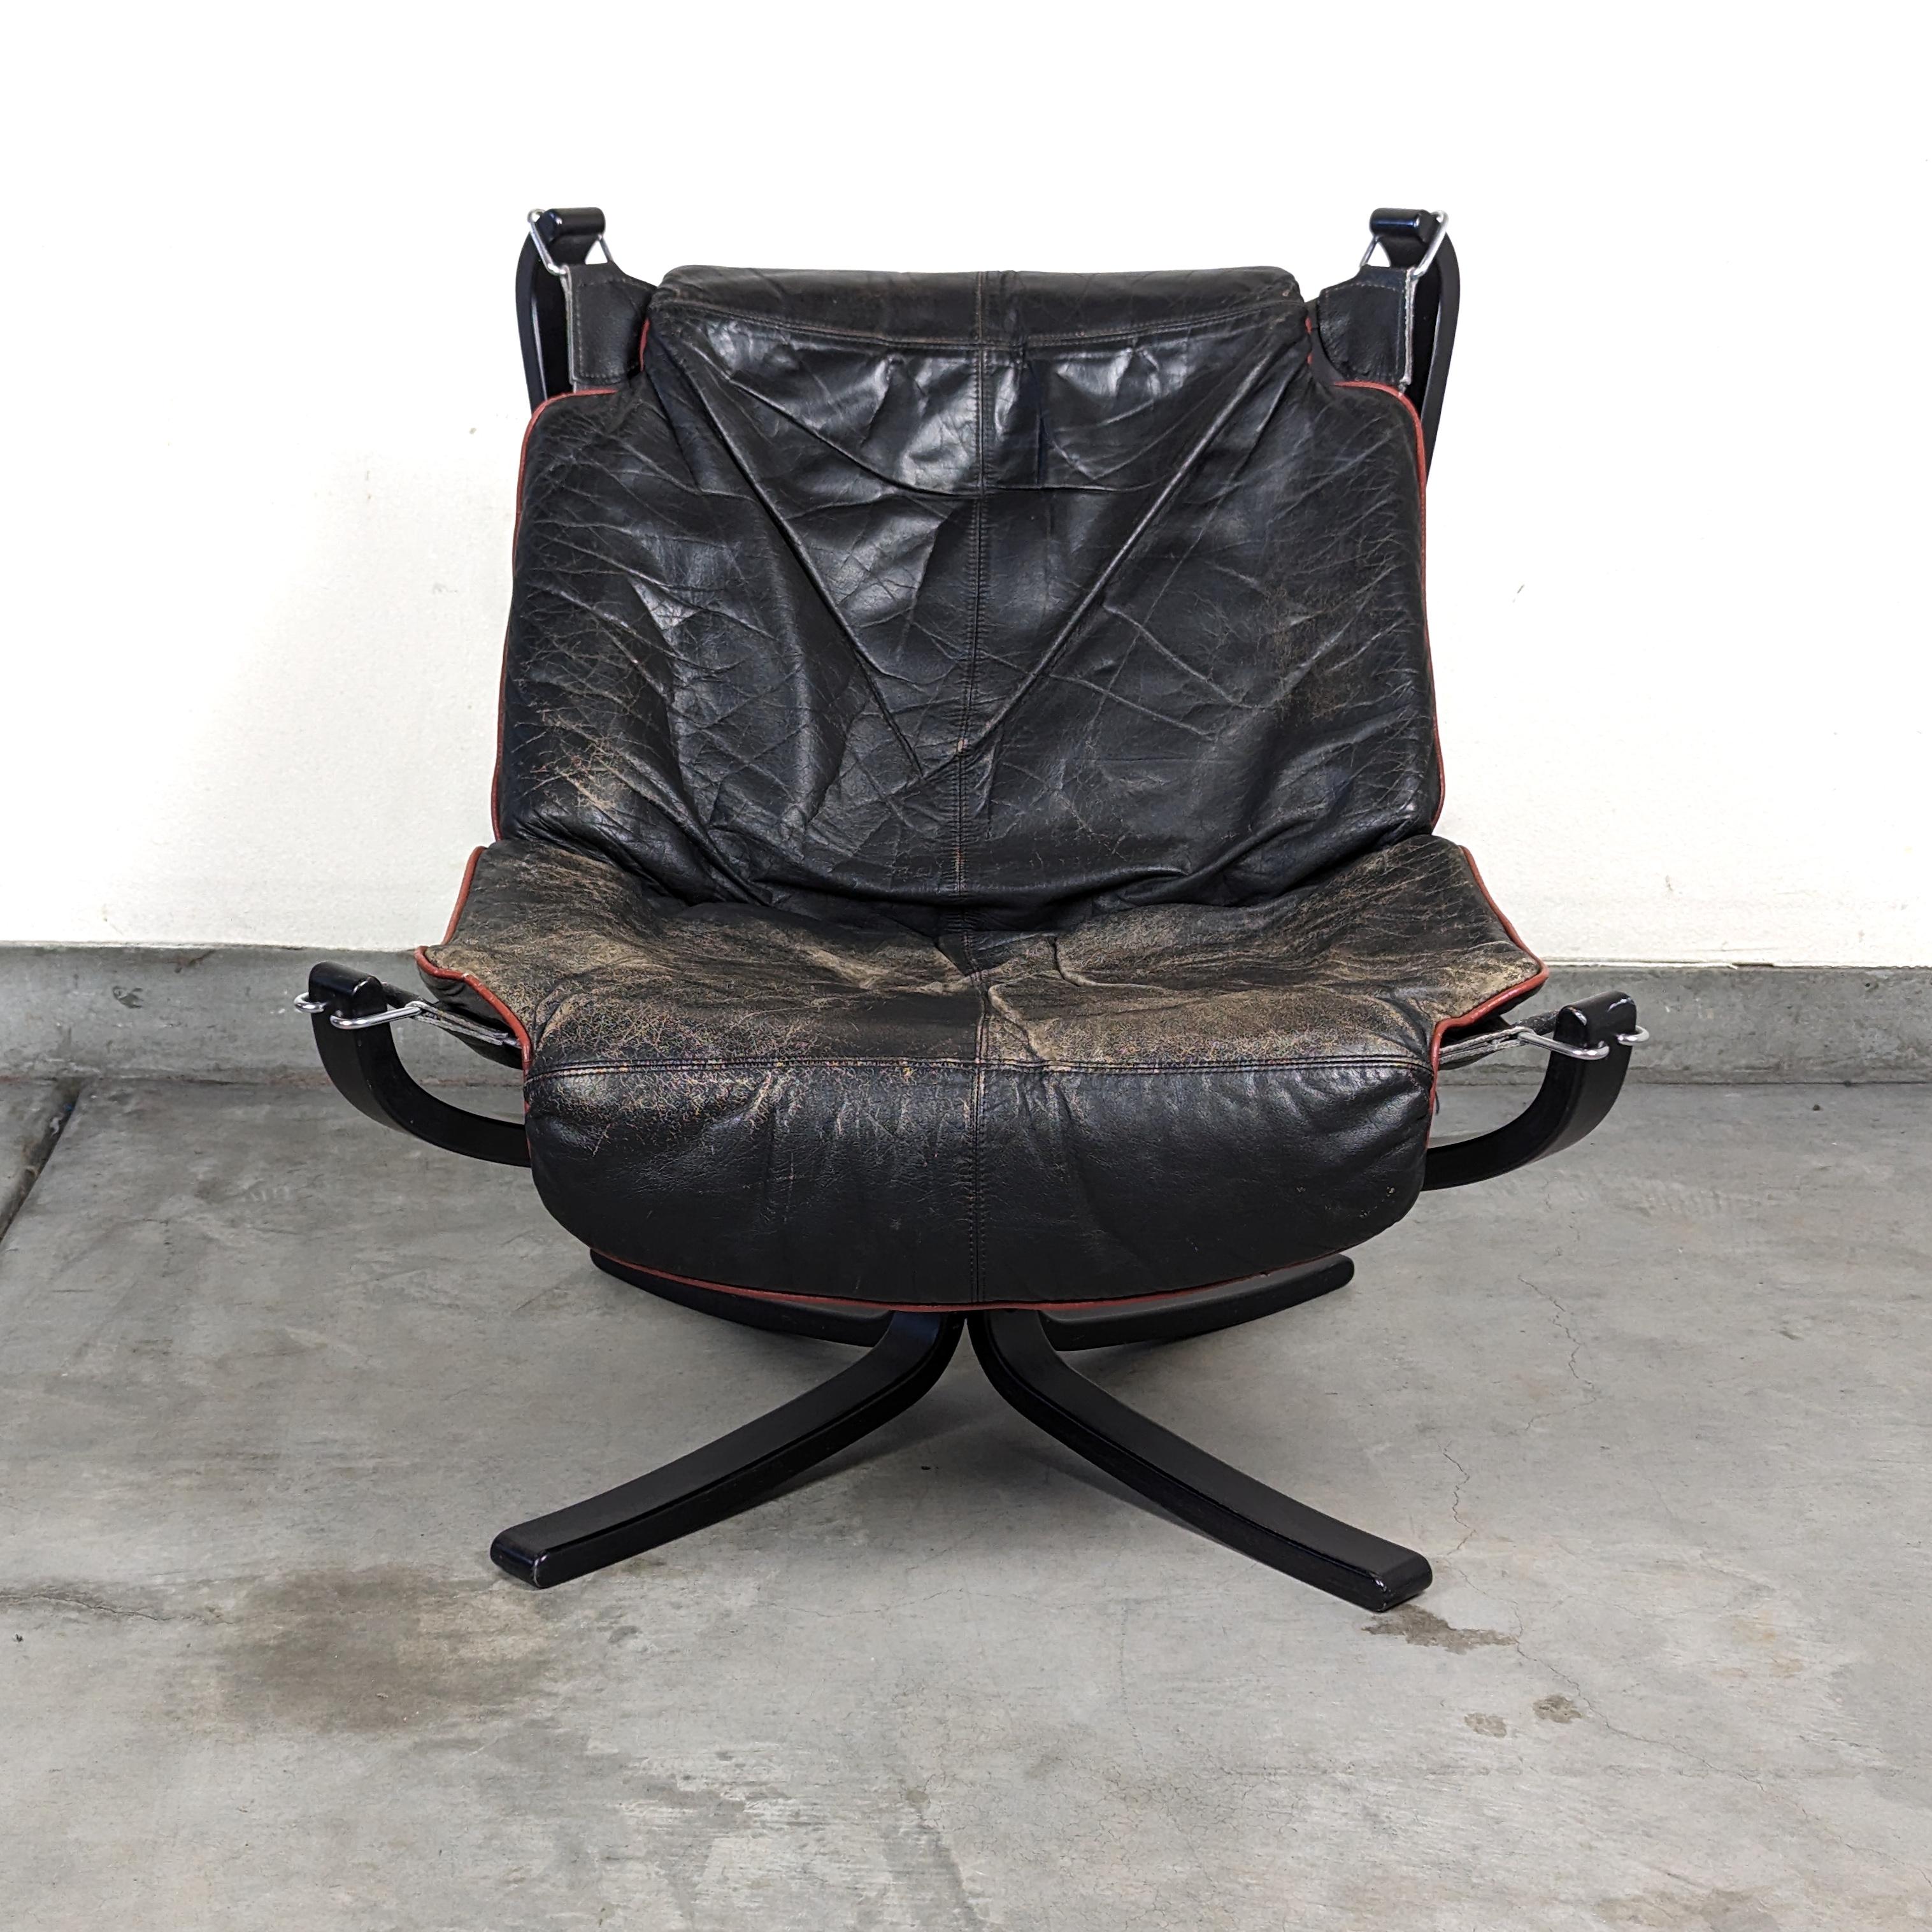 Mid Century Modern Falcon Lounge Chair by Sigurd Resell for Vatne Mobler, c1970s For Sale 3